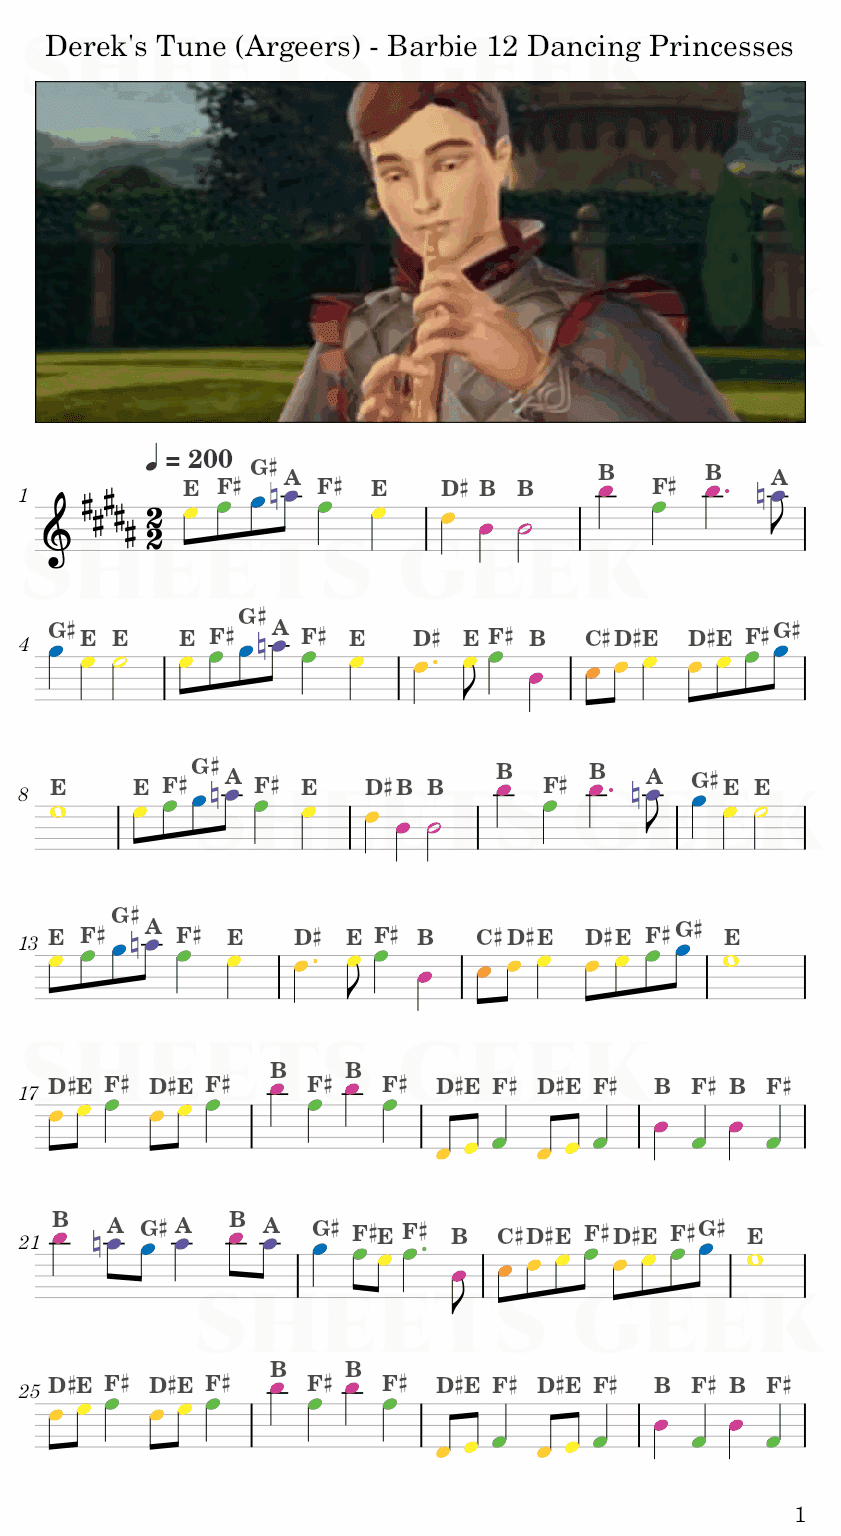 Derek's Tune (Argeers) - Barbie 12 Dancing Princesses Easy Sheet Music Free for piano, keyboard, flute, violin, sax, cello page 1